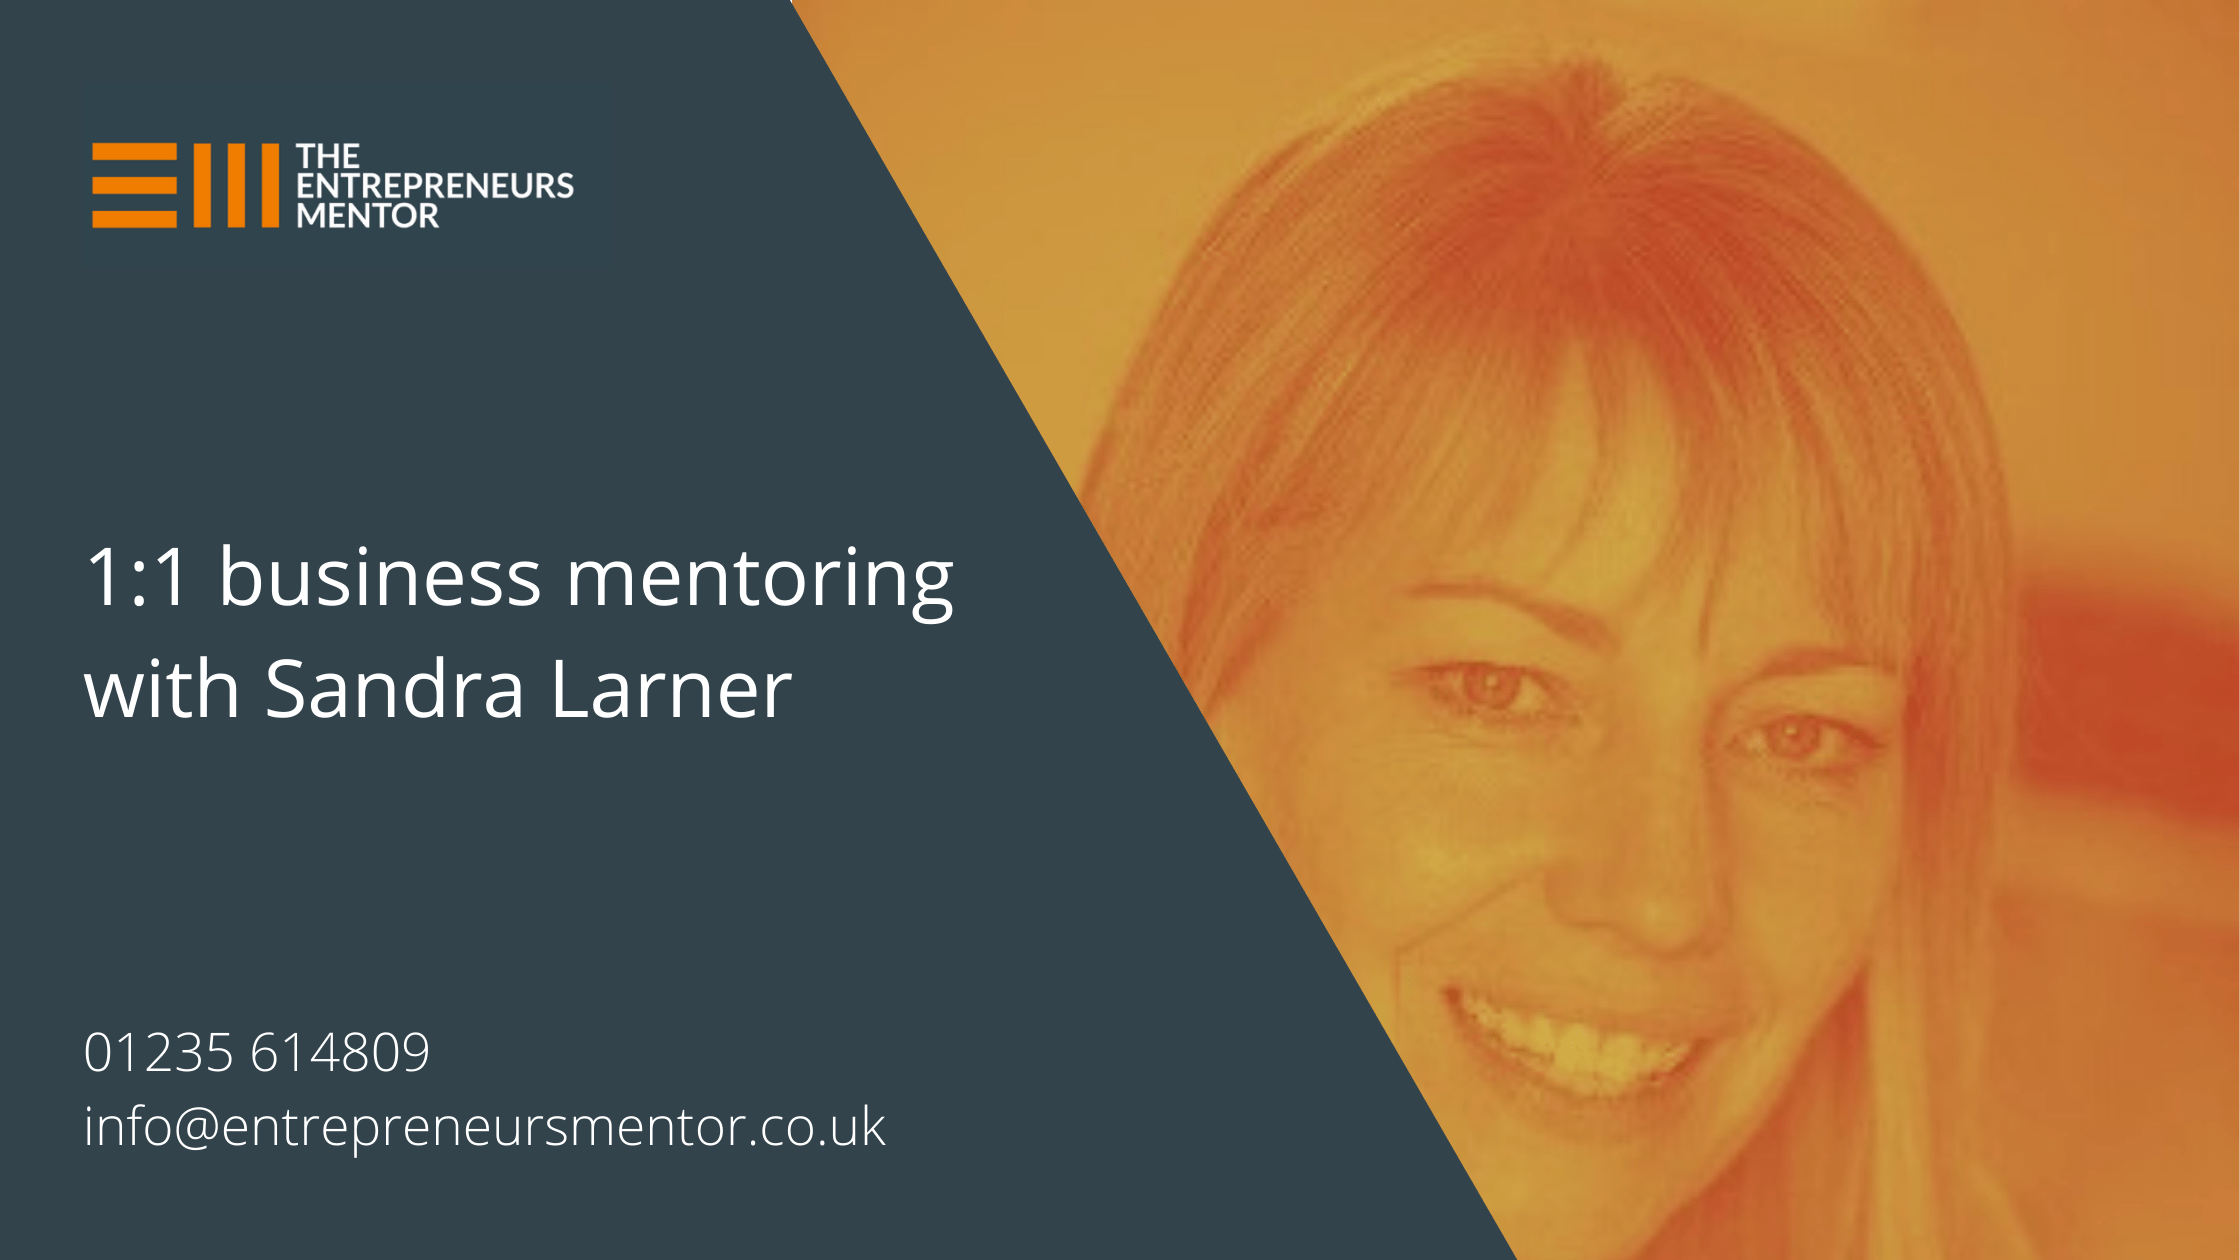 One to one business mentoring client, Sandra Larner, with the title